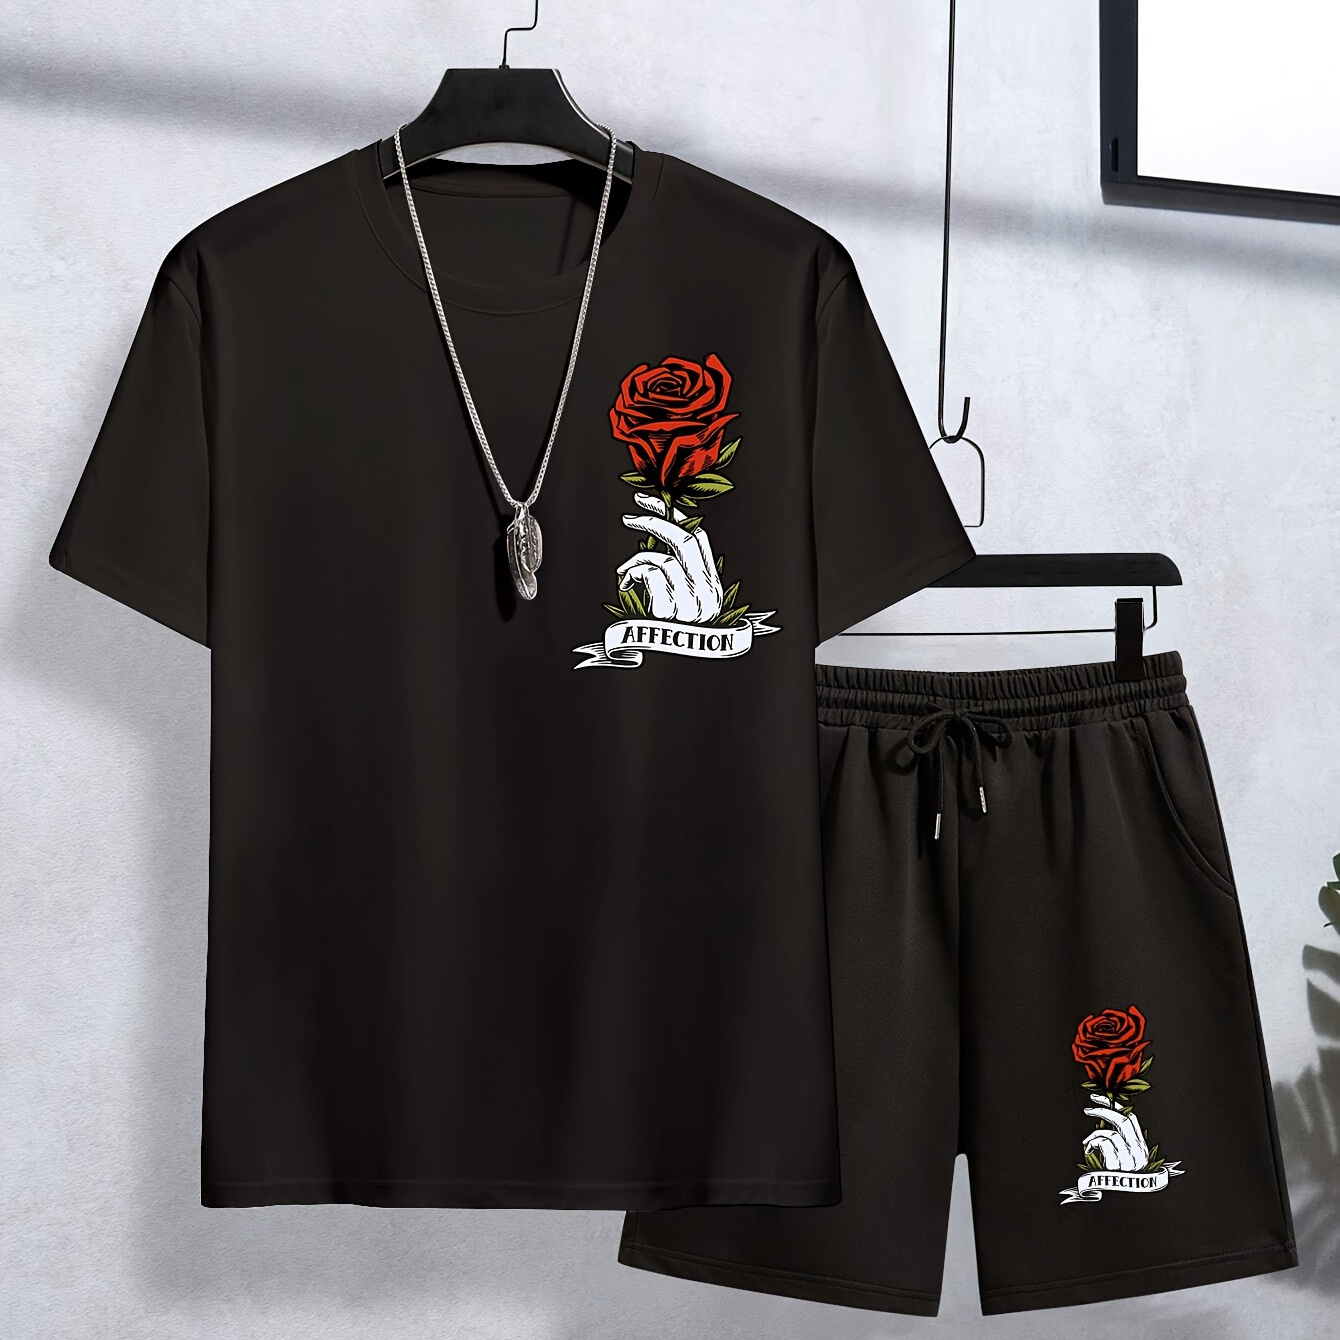 

2pcs Boy's Summer Casual Co-ord Set - Hand And Rose Pattern Short Sleeve T-shirt + Shorts Cool Comfy Set As Gift